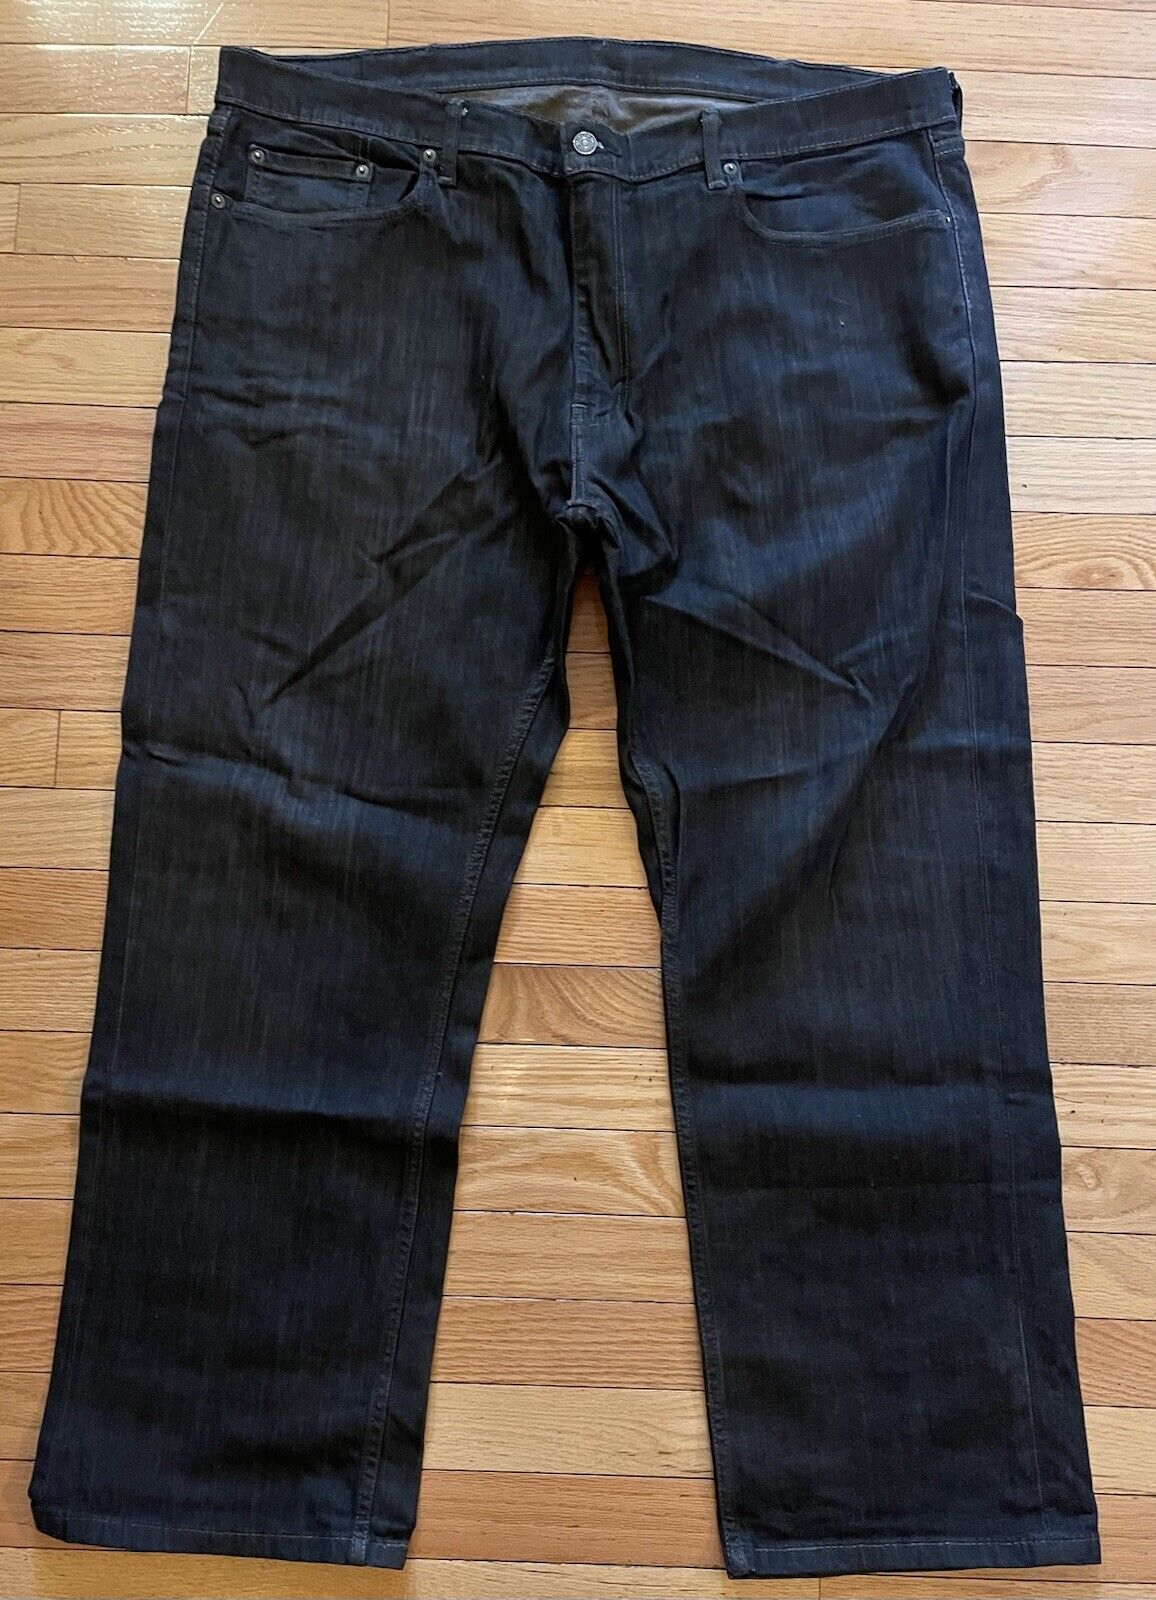 Levis 559 Jeans Black Straight Leg Relaxed Stretc… - image 1